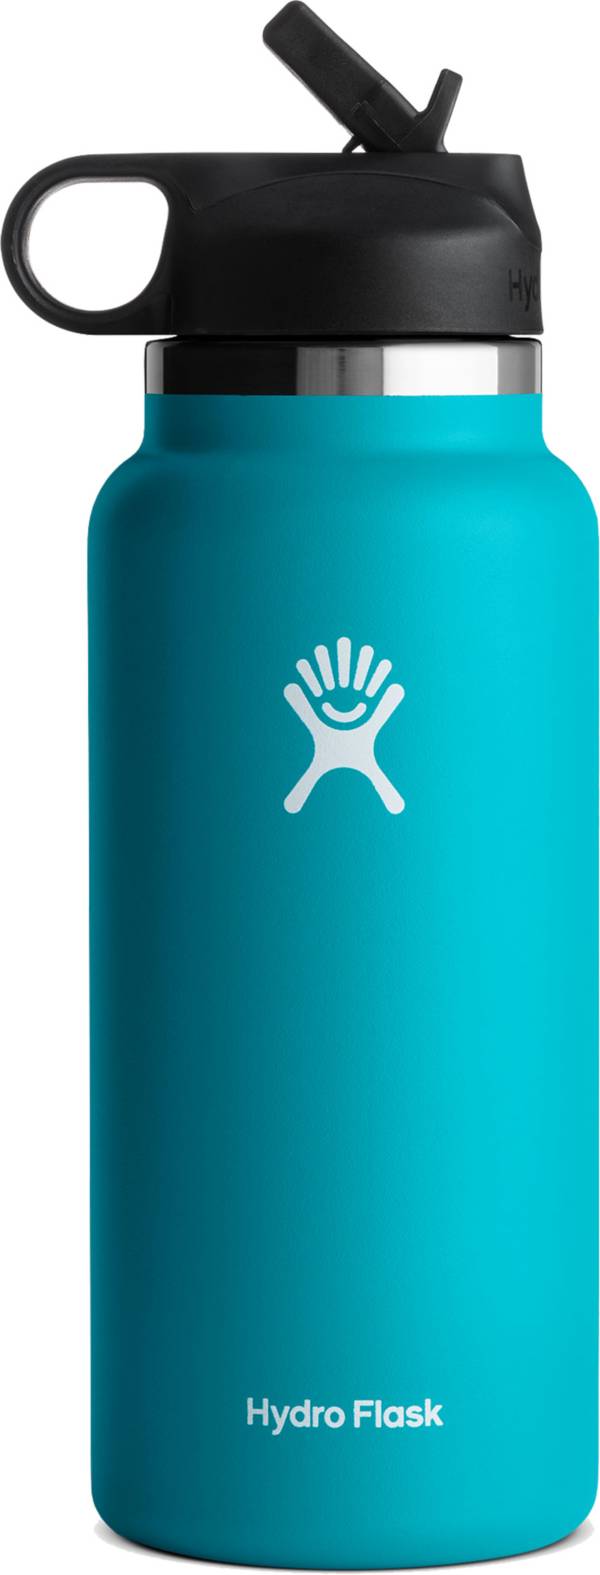 Hydro Flask 32 oz. Wide Mouth Bottle with Straw Lid product image